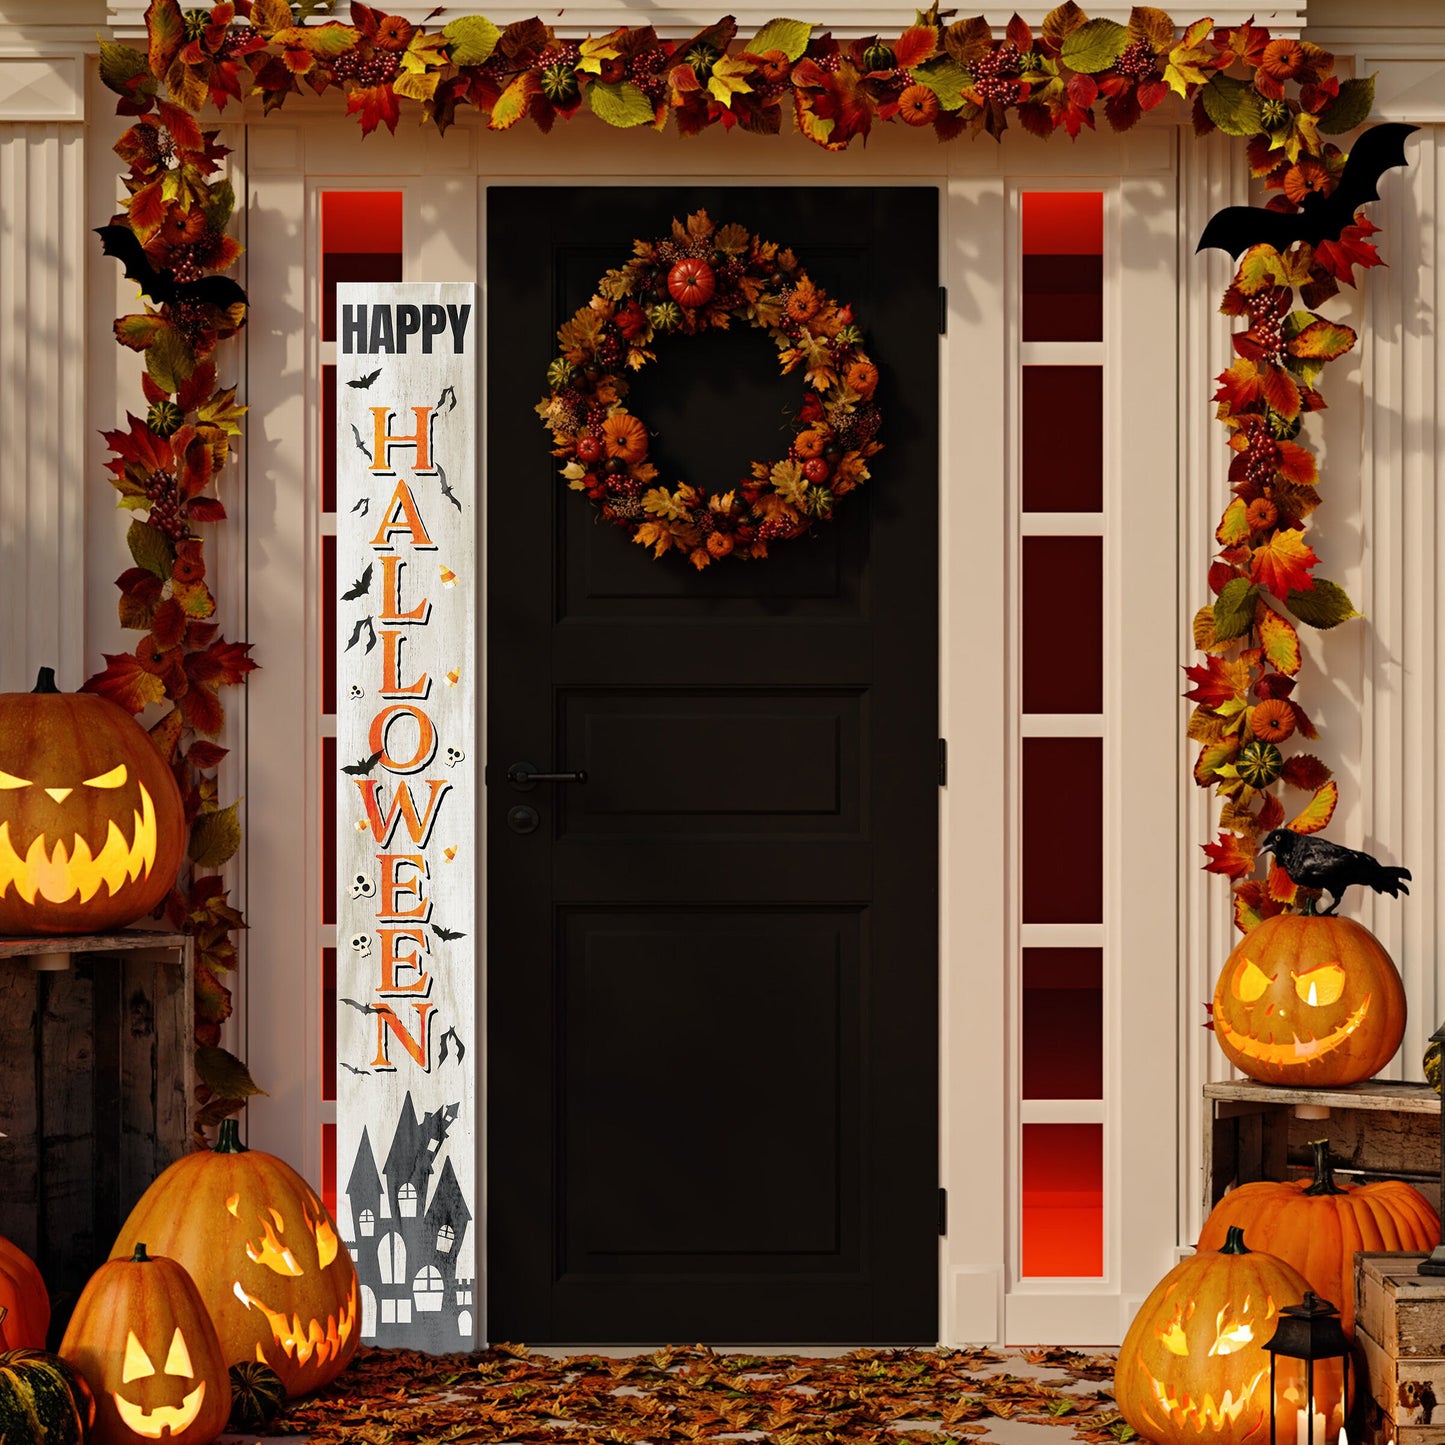 72in Wooden "Happy Halloween" Porch Sign - Spooky and Festive Front Door Decor for Seasonal Celebrations